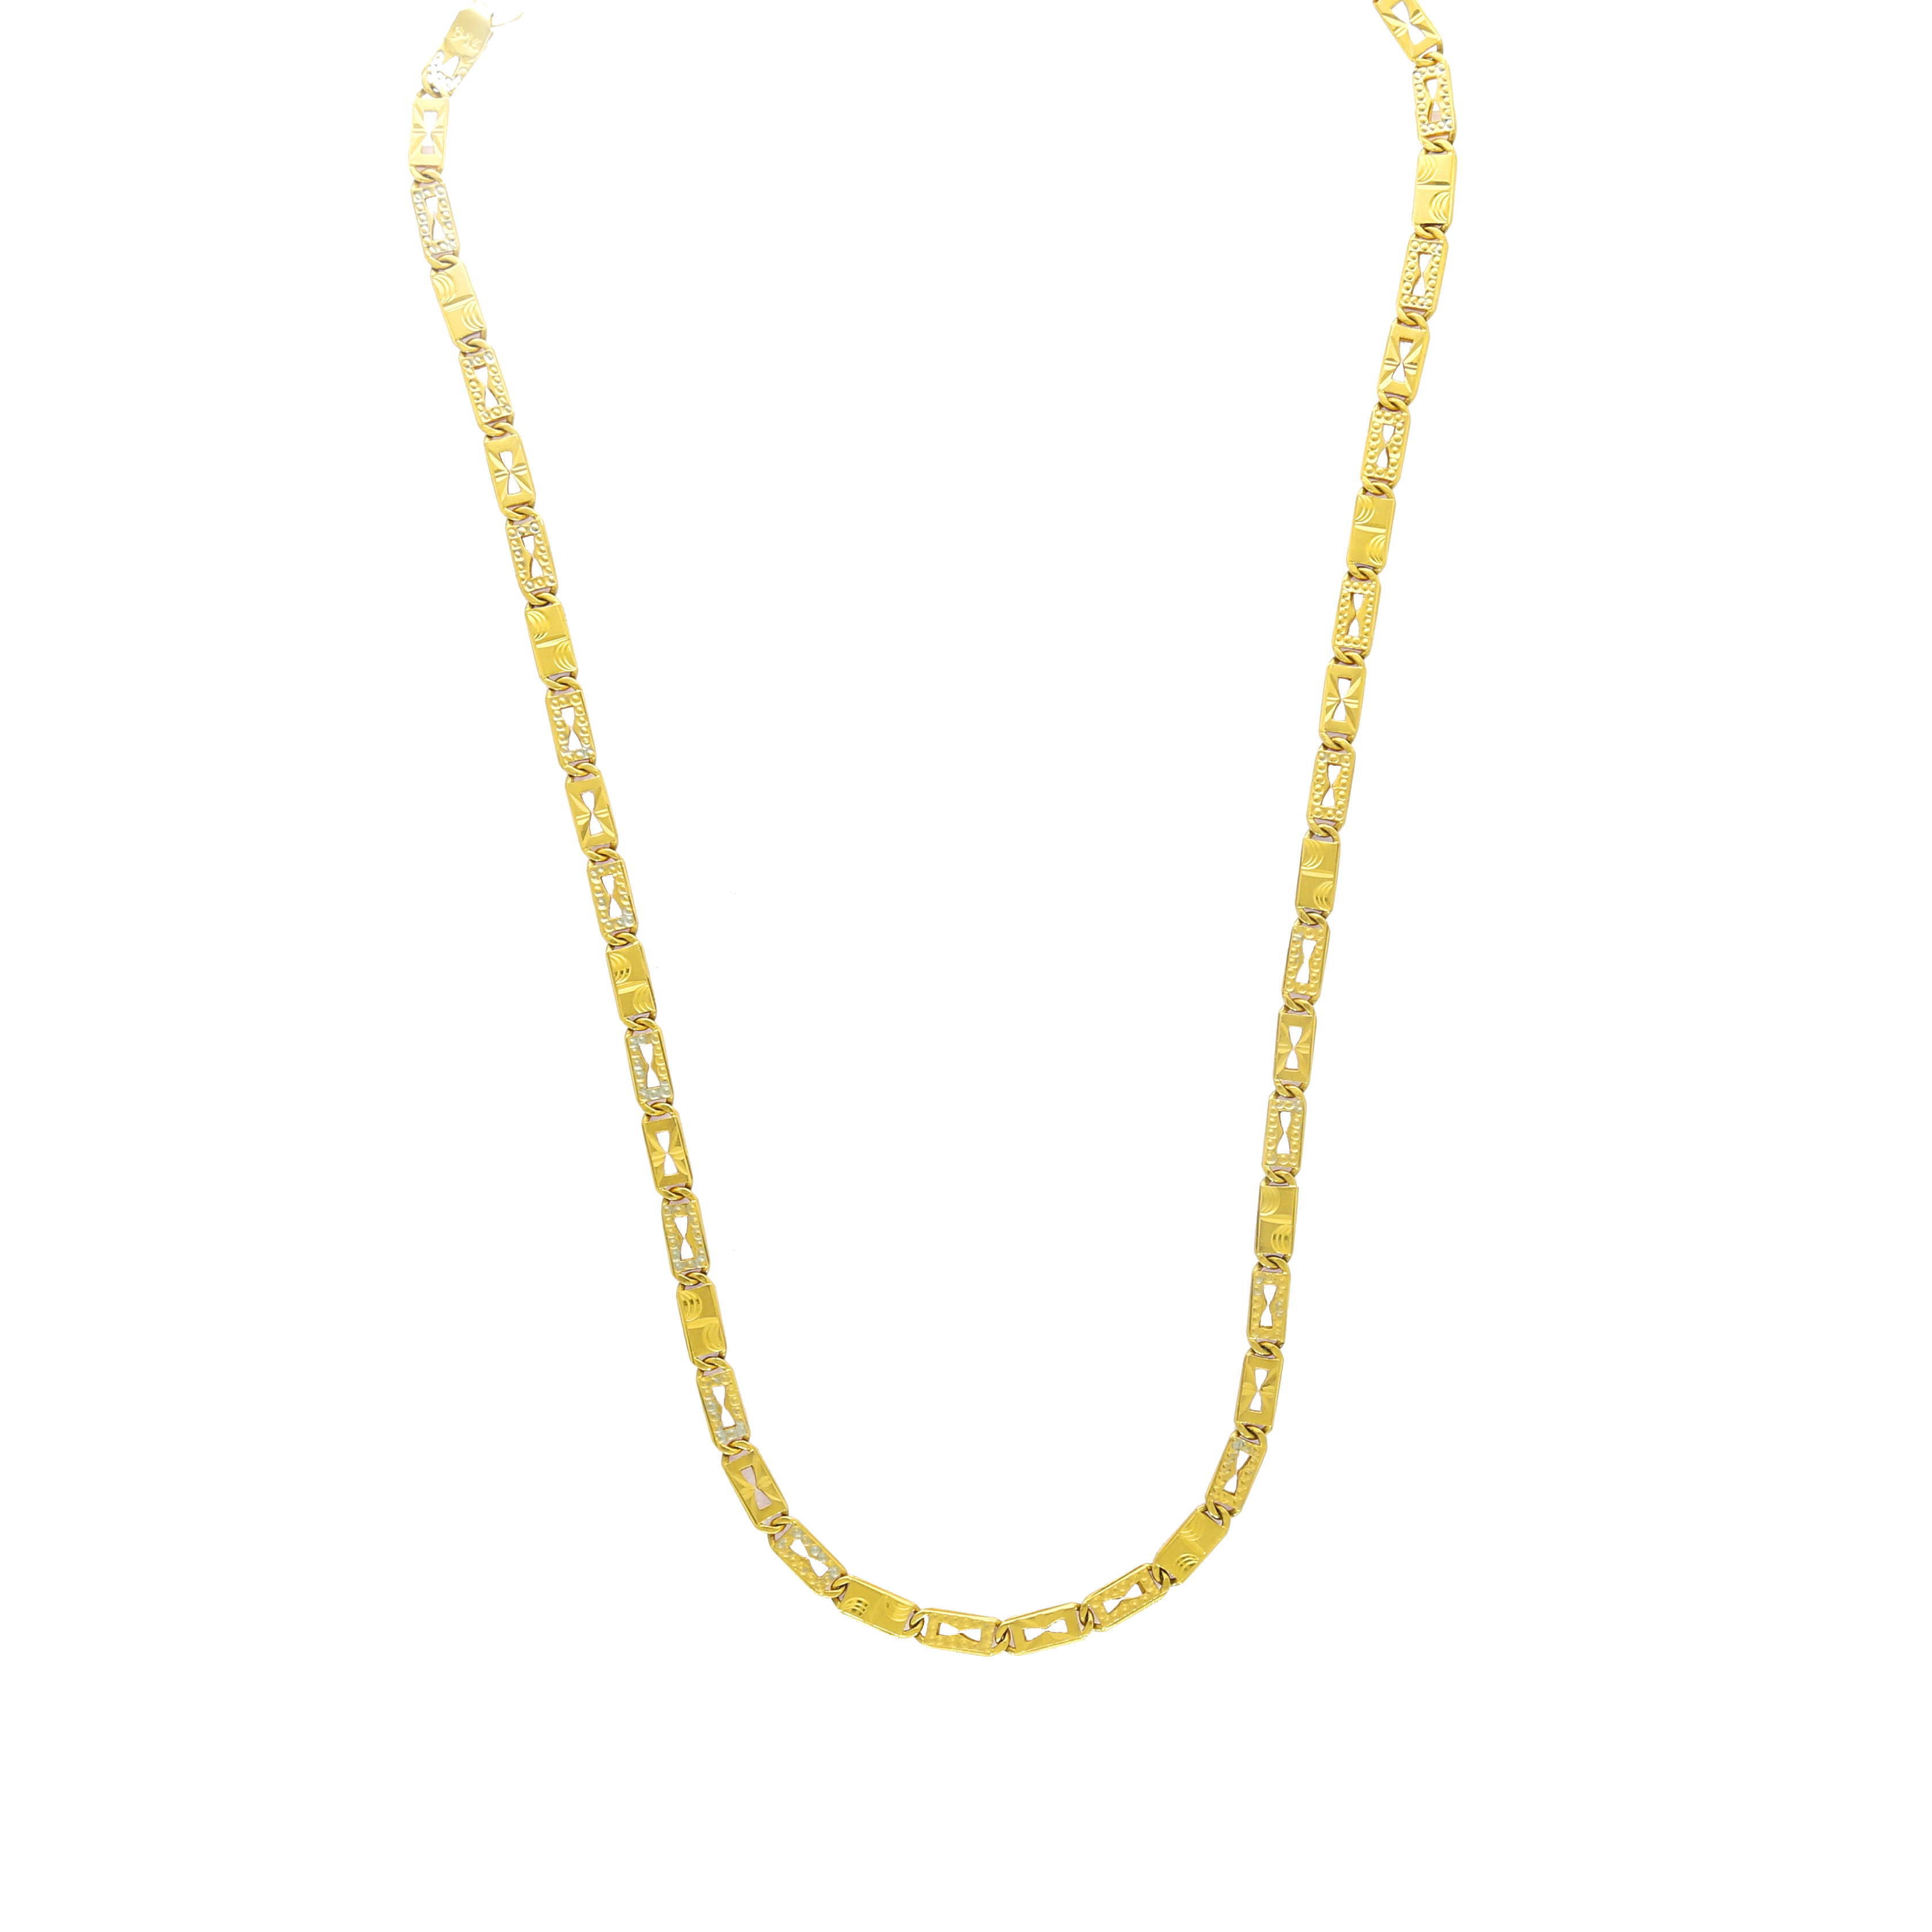 Magnificent Gold Chain 22k For Gents